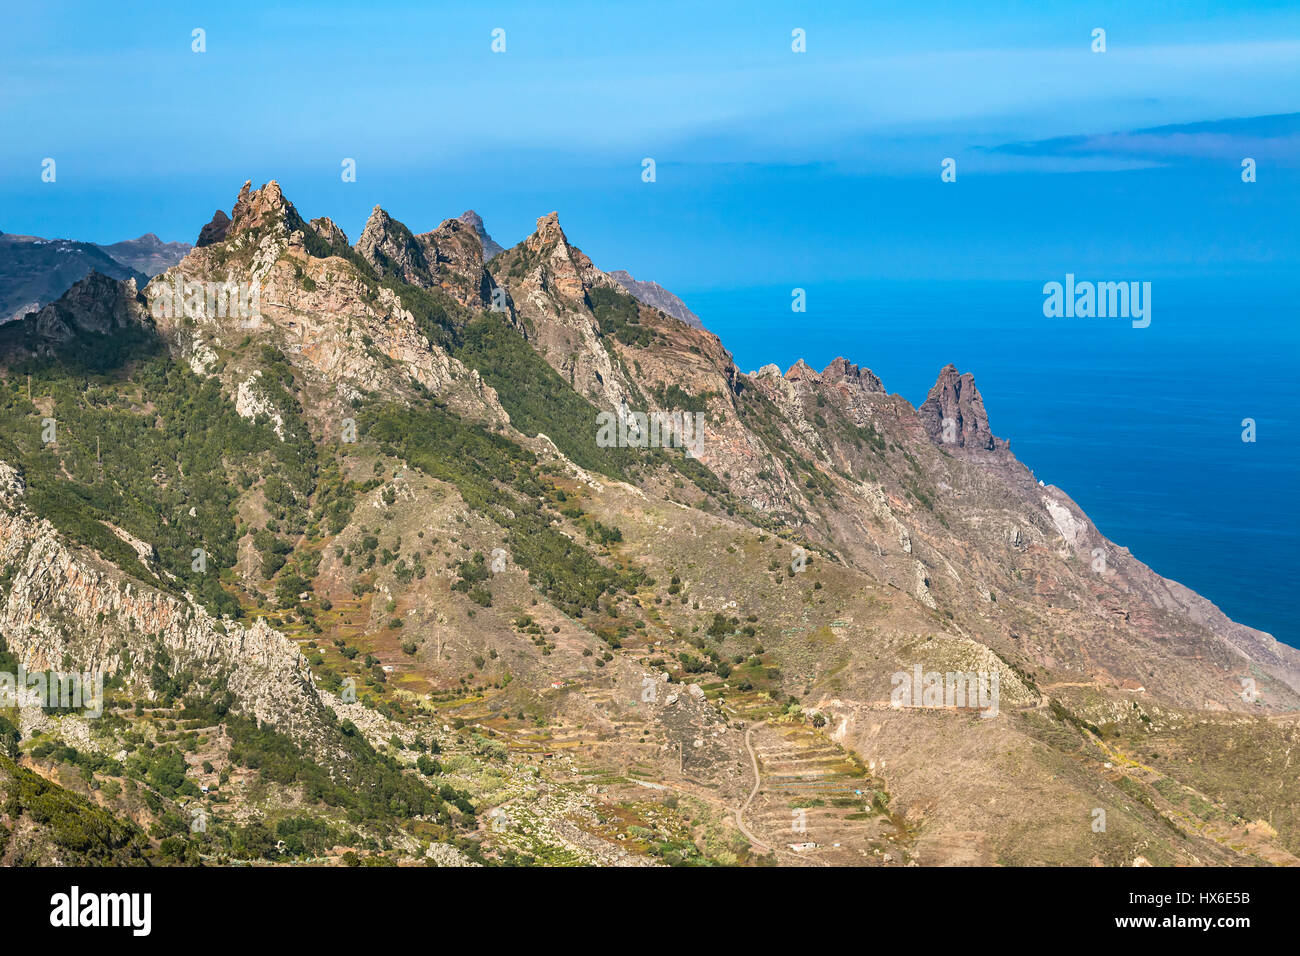 The Anaga Mountains in the north of Tenerife, Spain from an observation point. Stock Photo